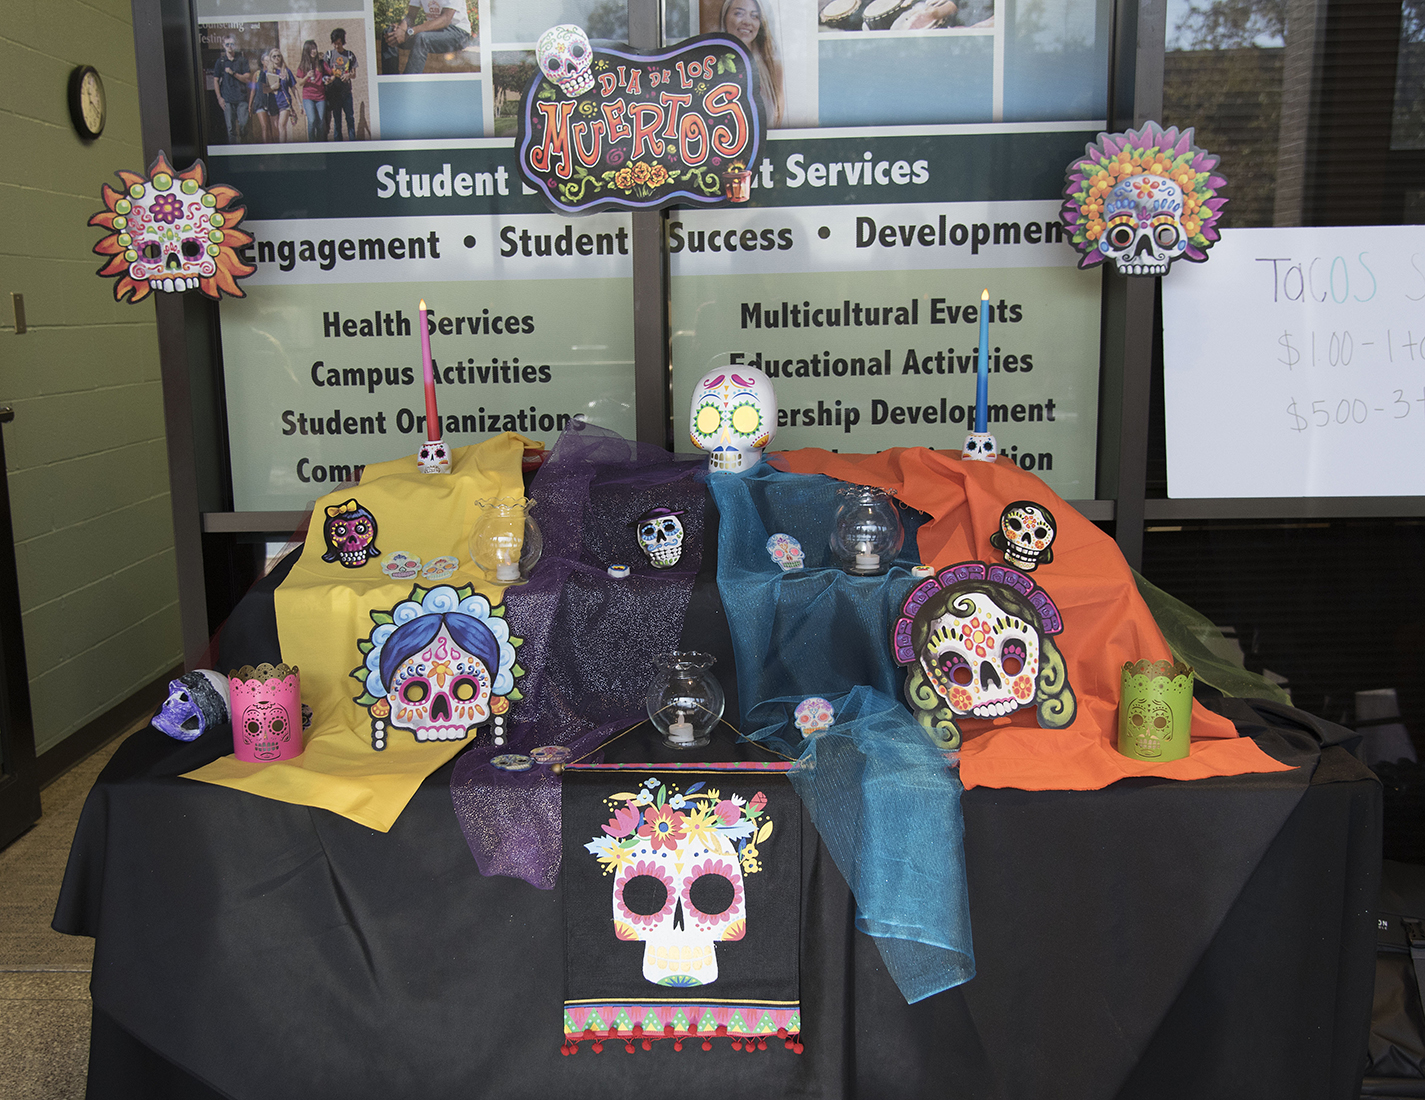 NE students participate in a Mexican tradition Nov. 1 that involves placing decorated sugar skulls and candles on the altar to honor loved ones who have died. The event is a cherished holiday within the Mexican culture.